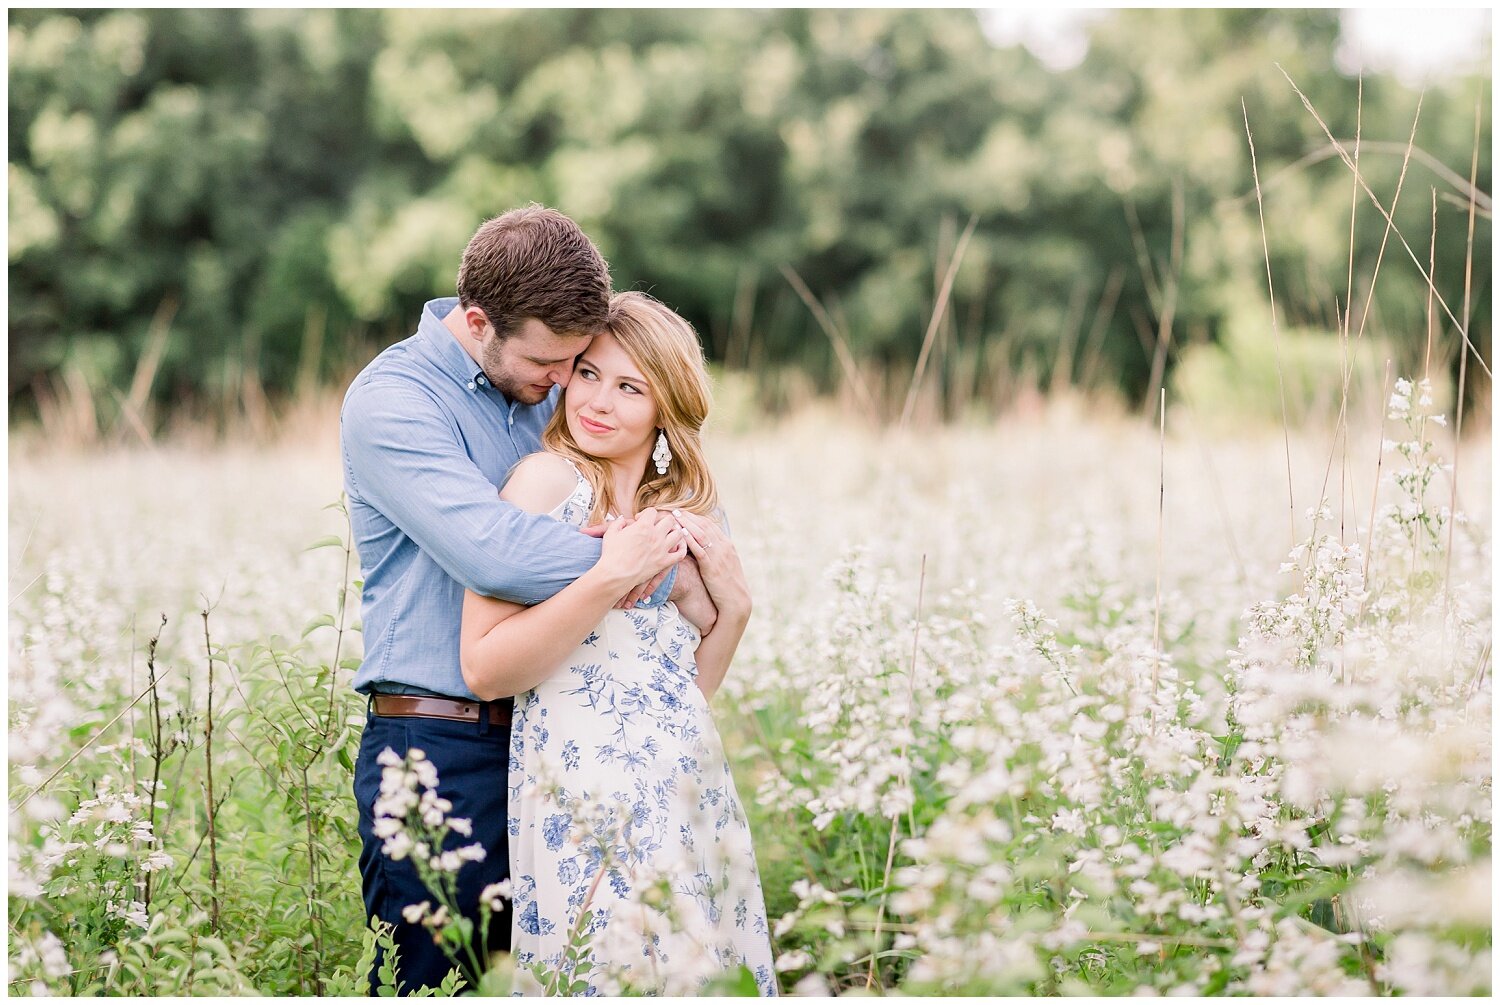 Lowcountry engagement and wedding photography